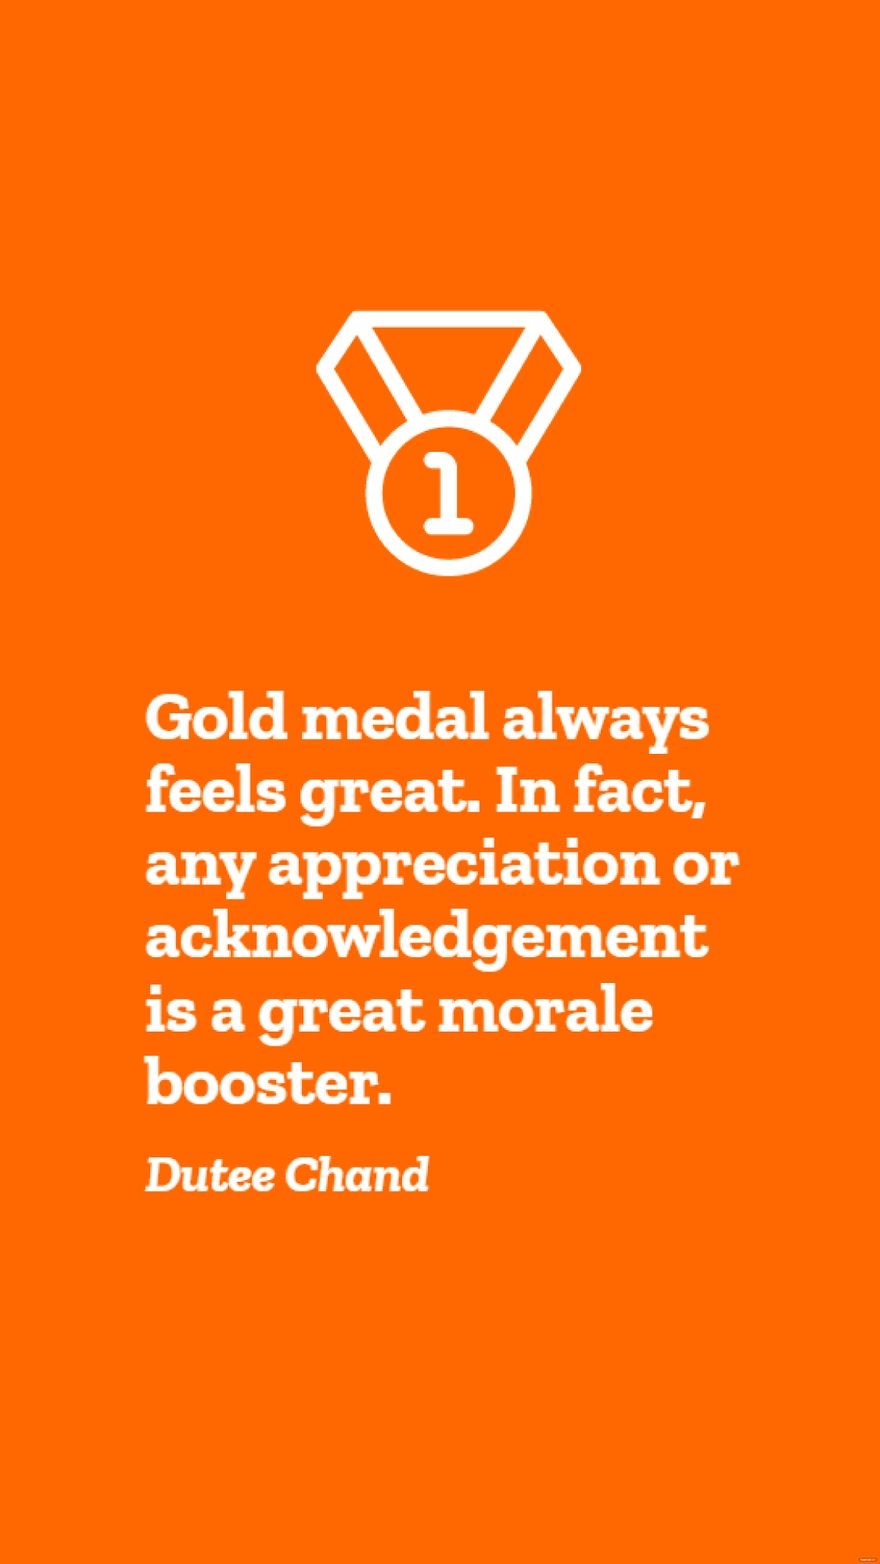 Free Dutee Chand - Gold medal always feels great. In fact, any appreciation or acknowledgement is a great morale booster. in JPG